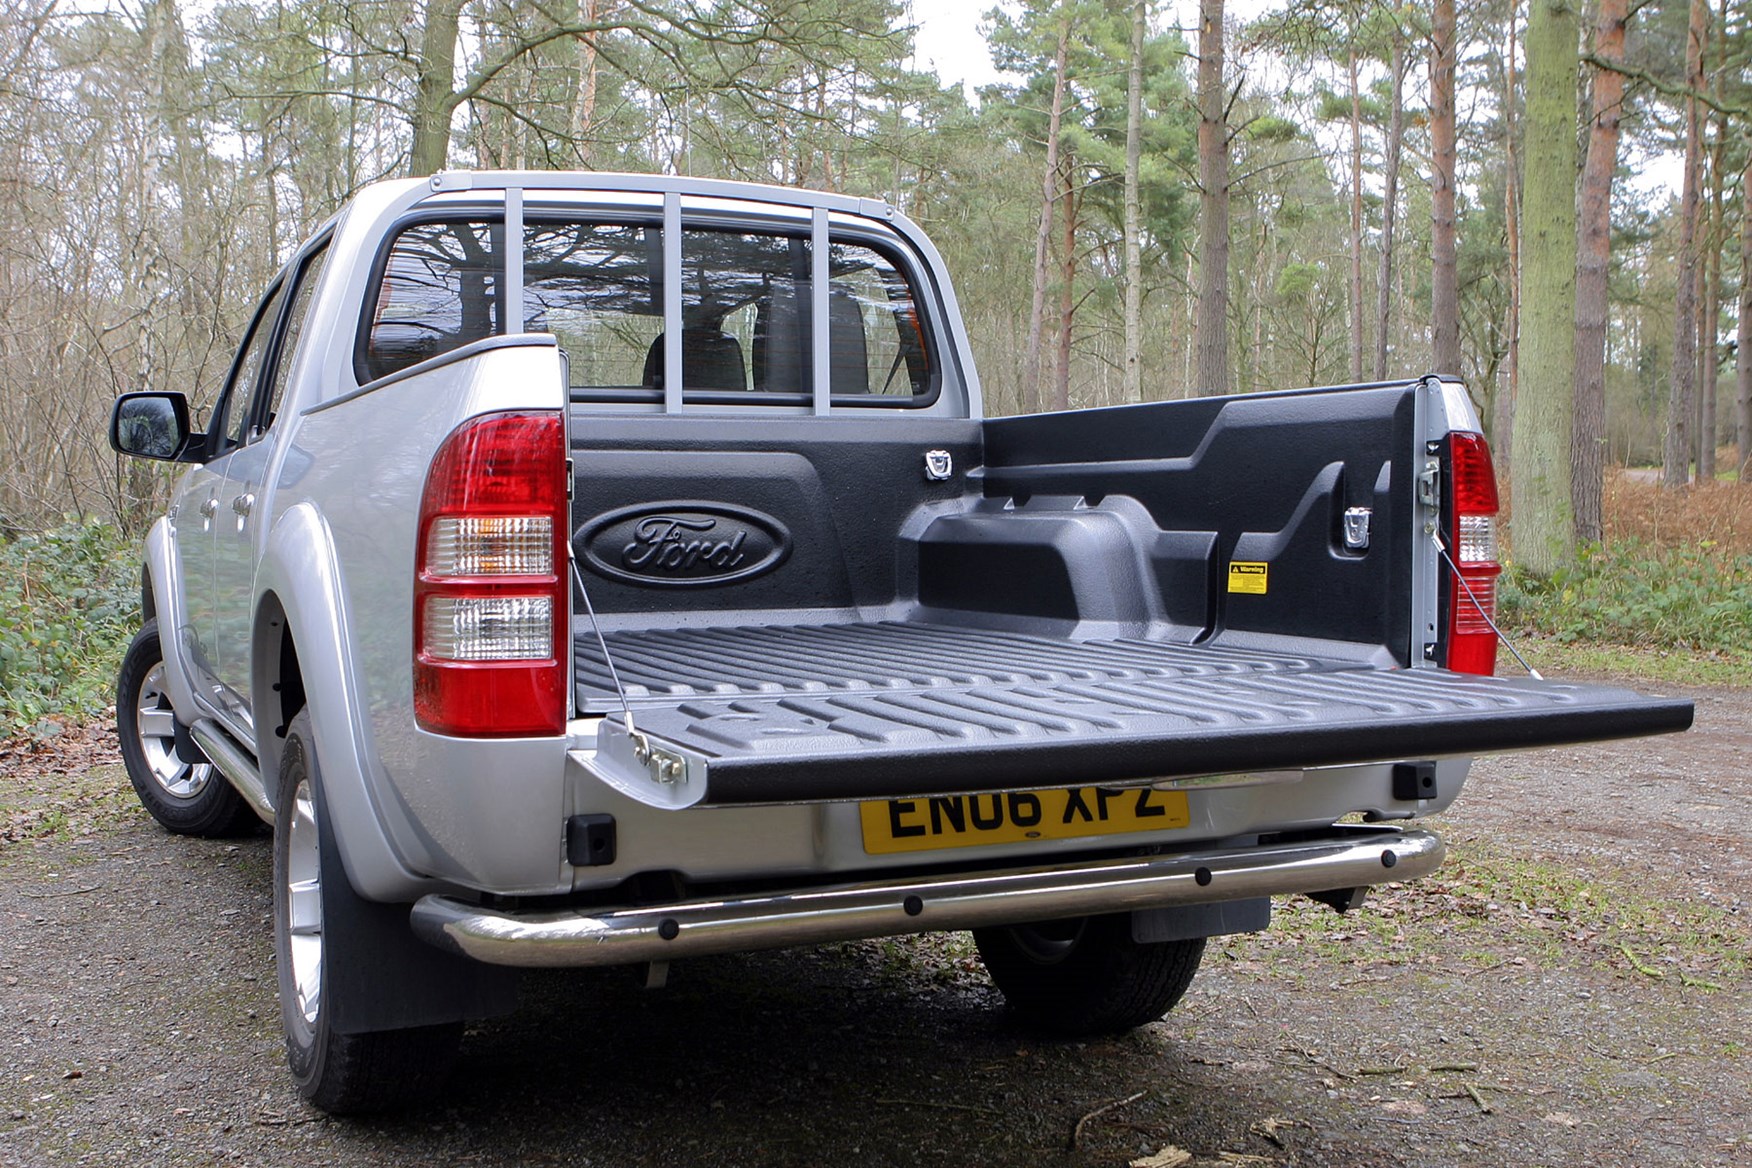 Ford Ranger (2006-2011) payload and towing